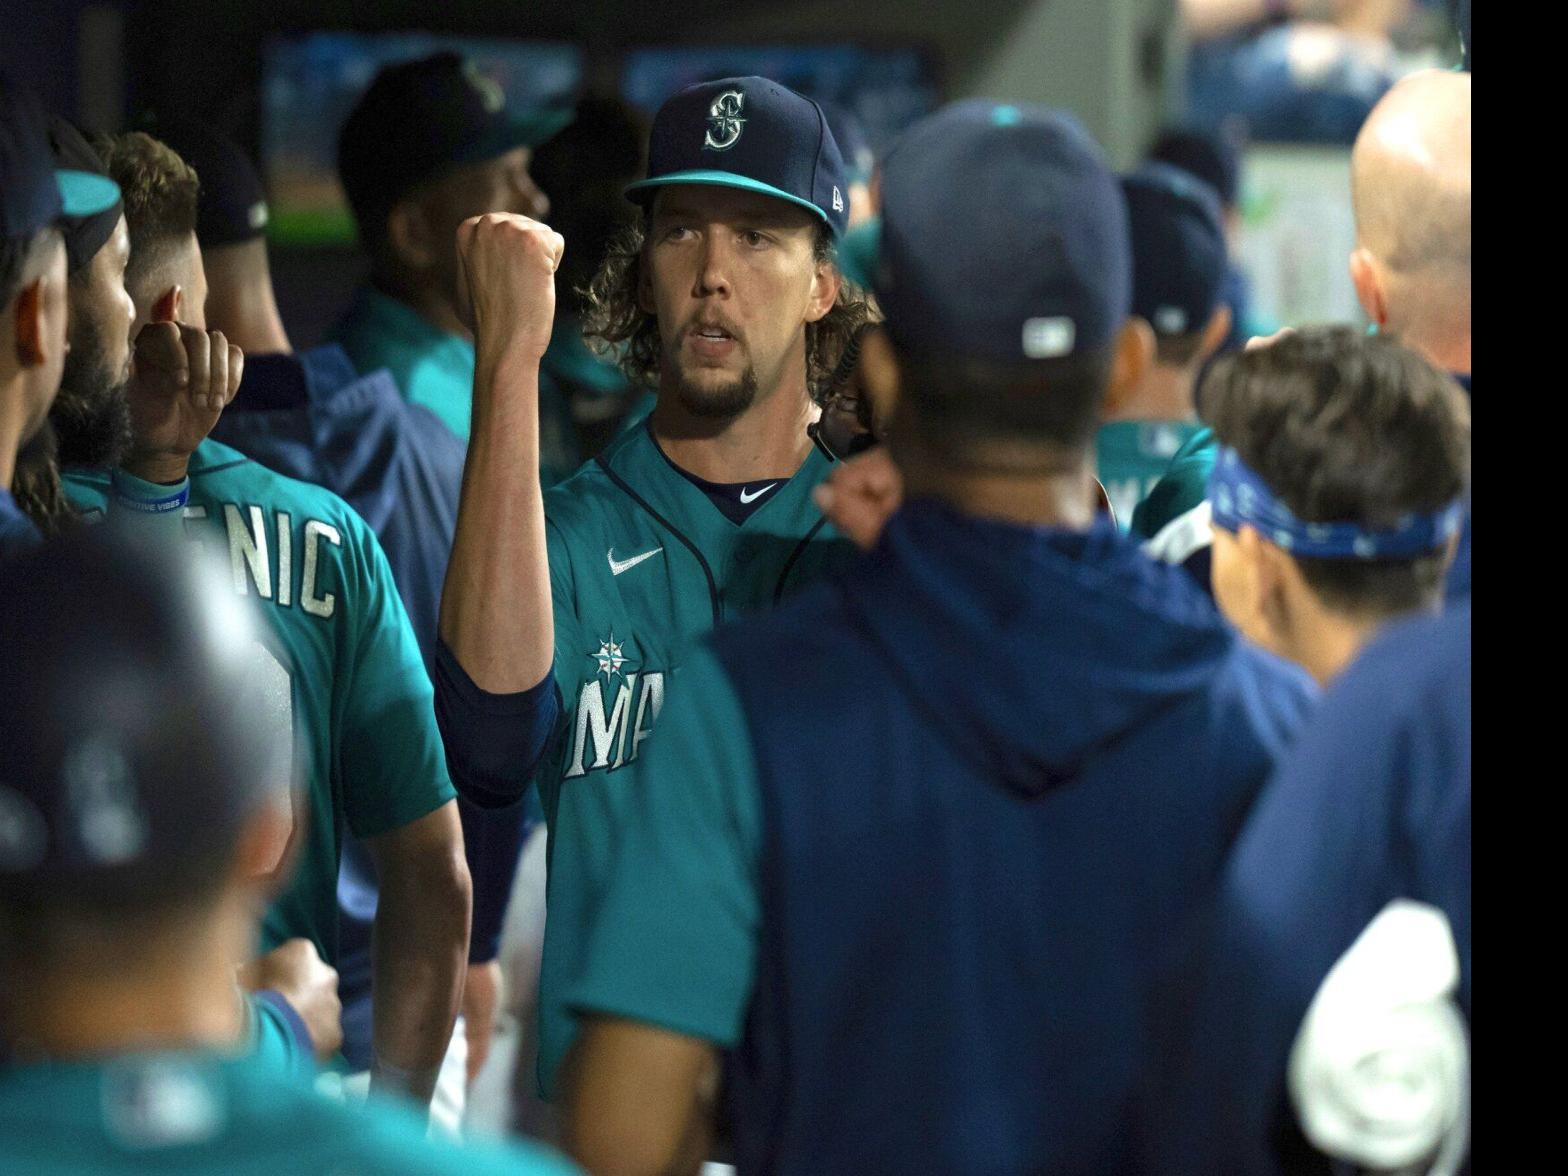 Mariners continue dominance of A's, win 7-2